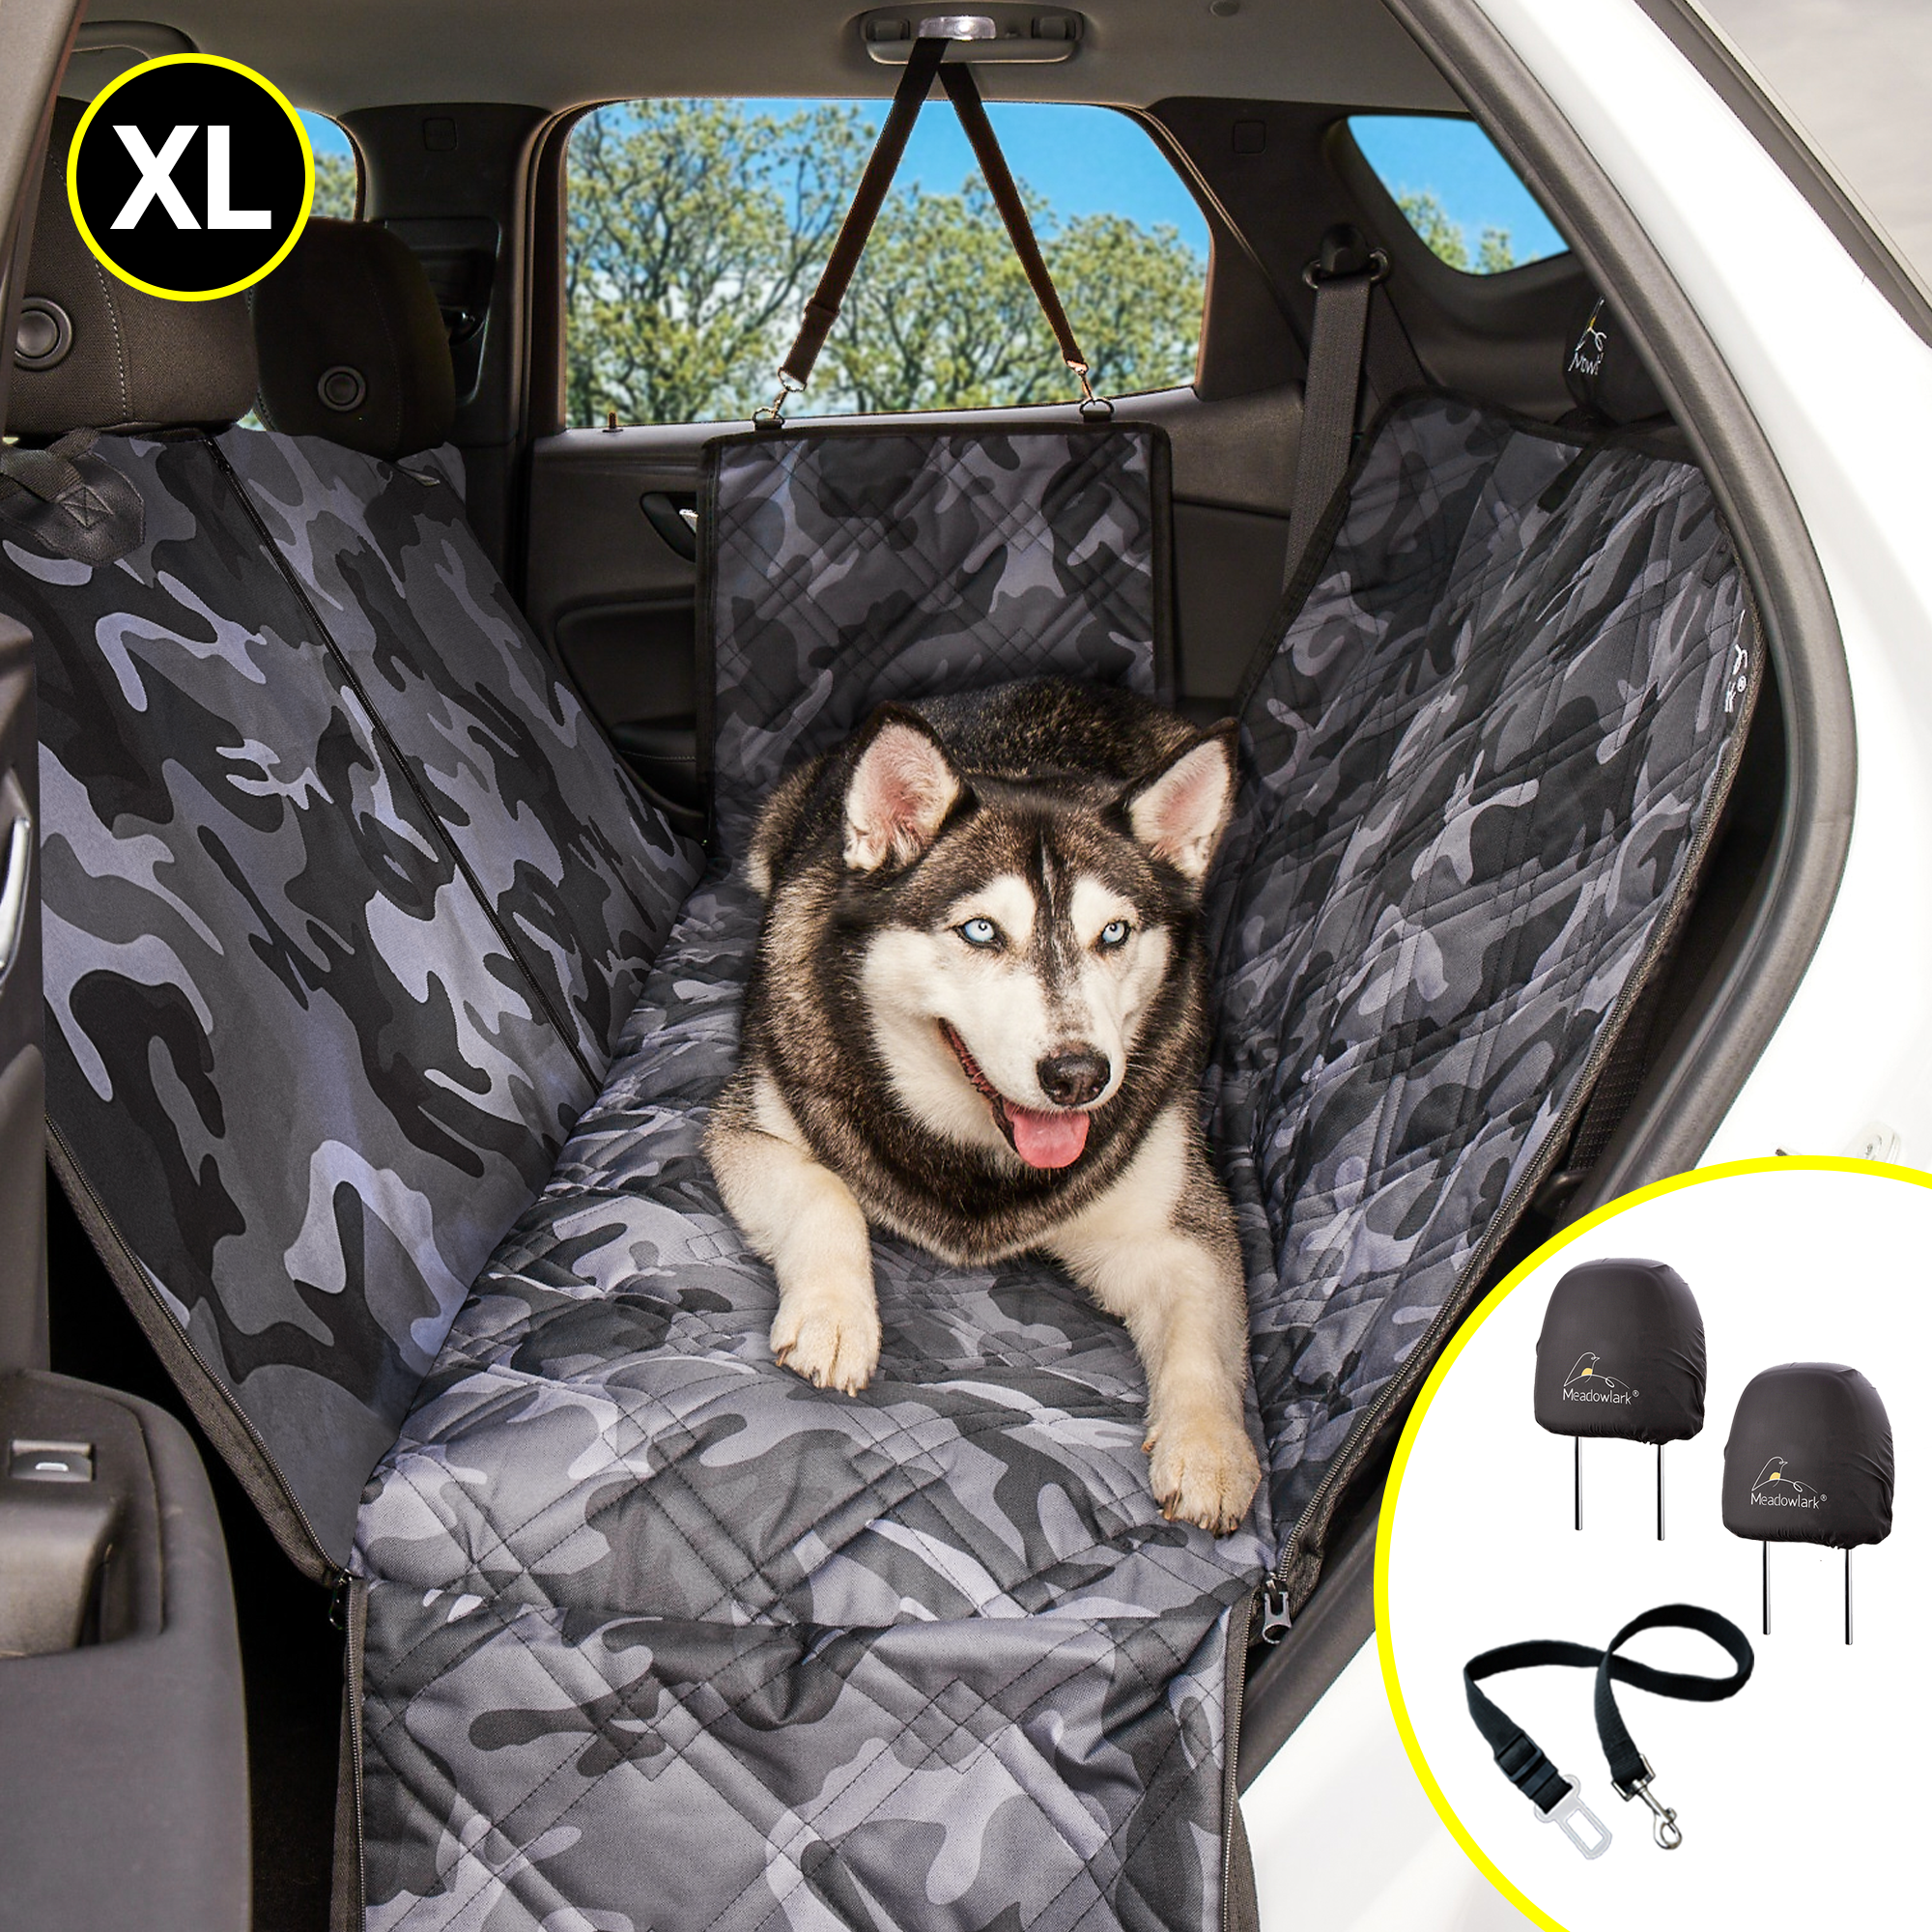 Dog Car Seat Cover Waterproof Hammock for Cars, Trucks and SUVs